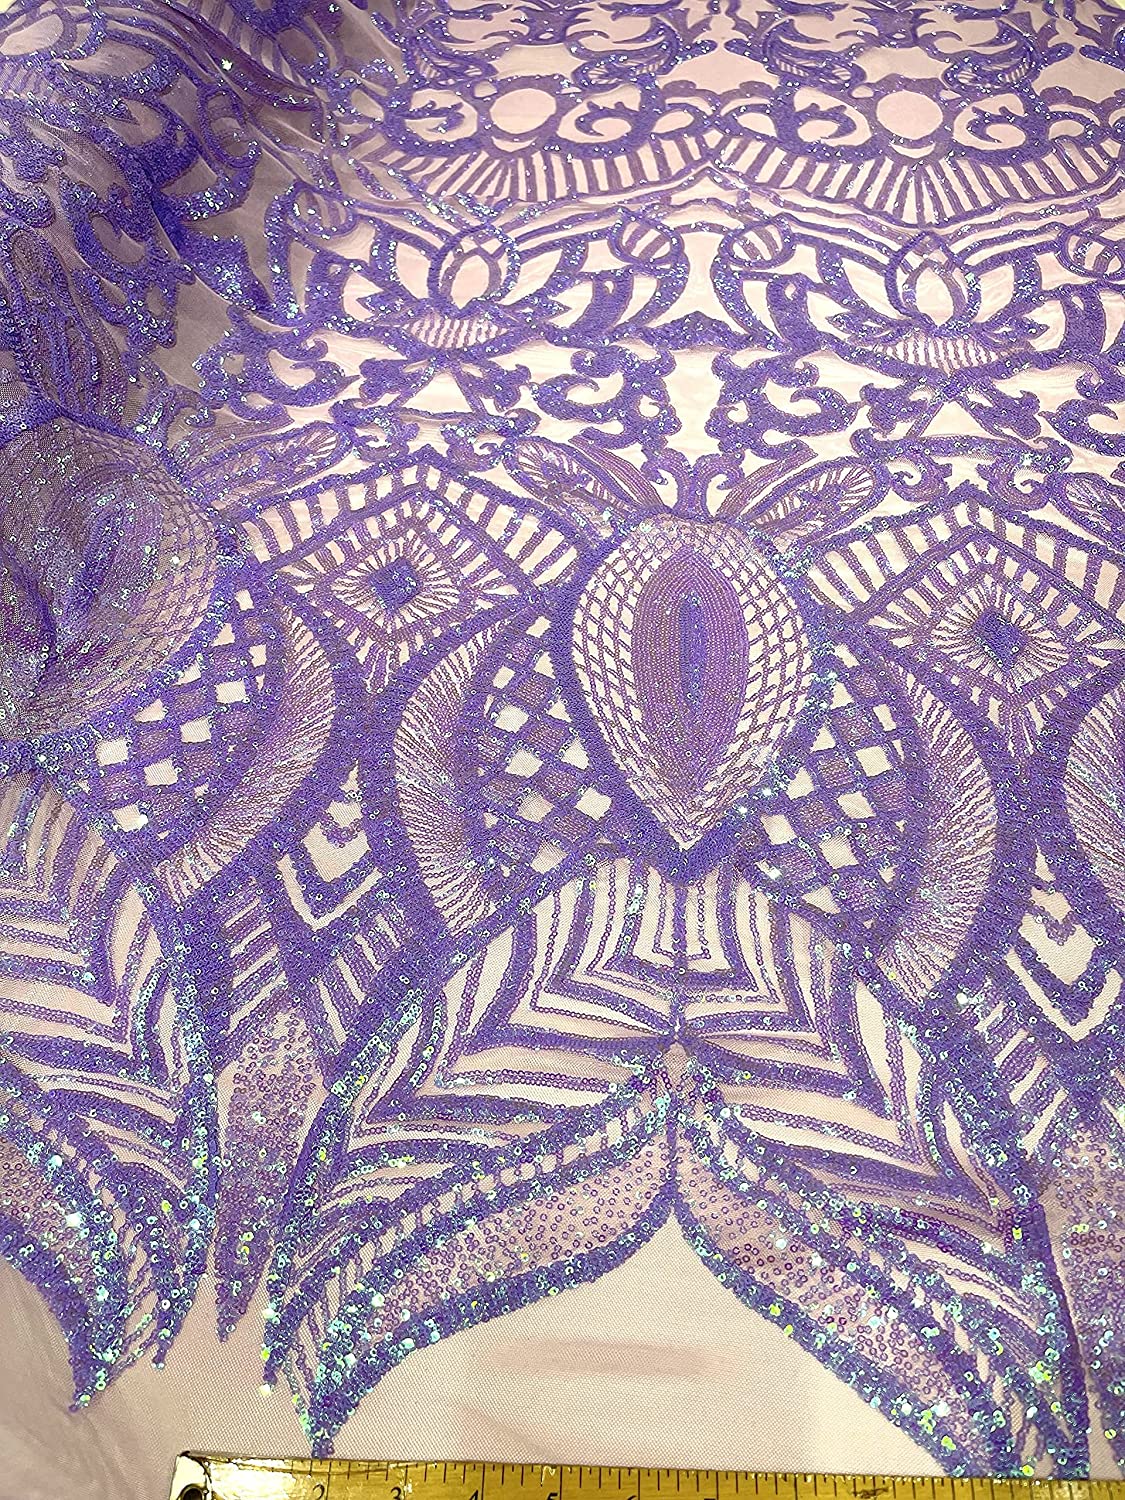 Iridescent Royalty Design On A 4 Way Stretch Mesh/Prom Fabric (1 Yard, Lilac Iridescent on Lilac Mesh)